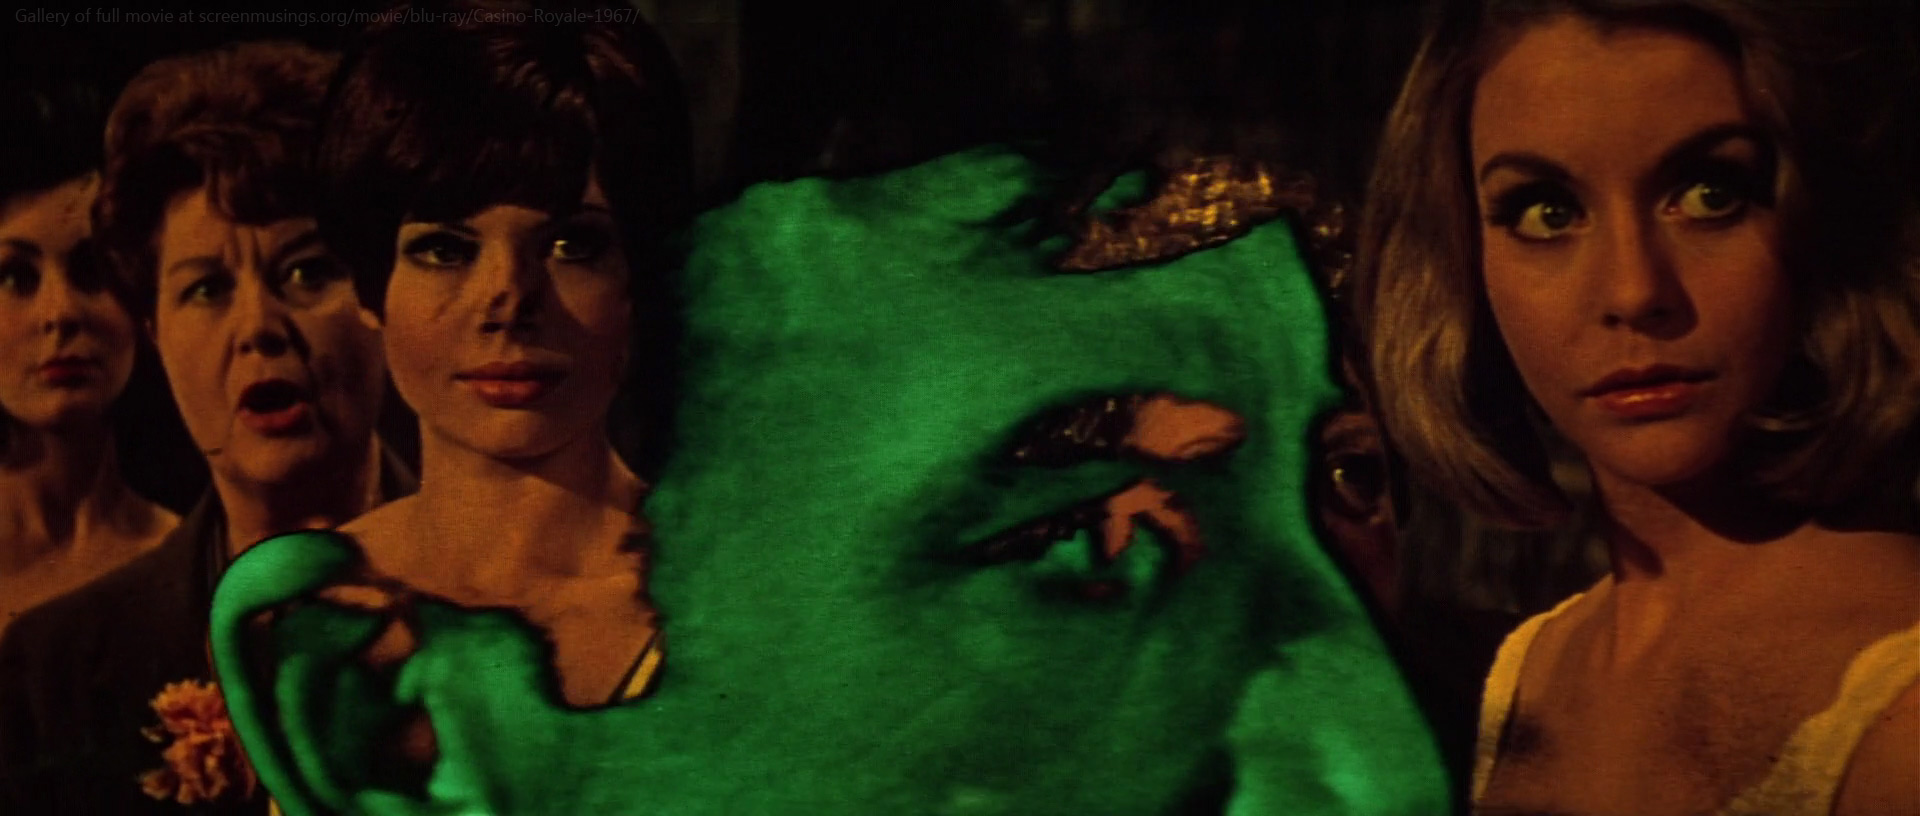 psychedelic imagery in Casino Royale